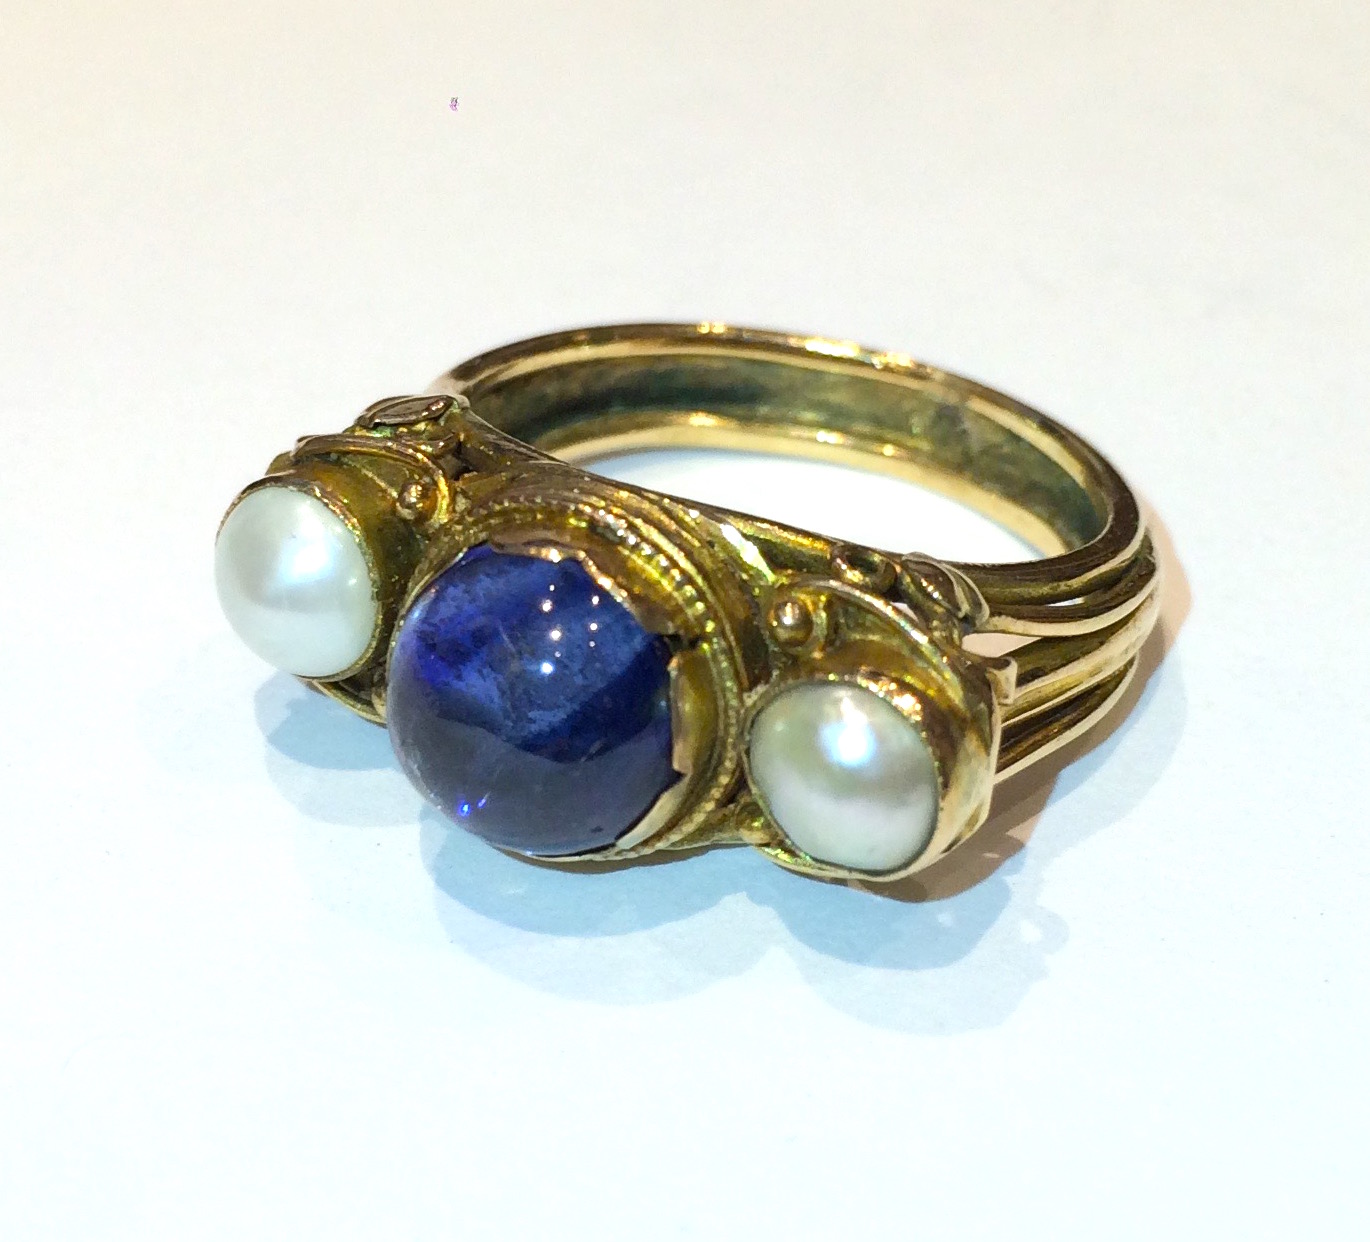 George Hunt (1892-1960) “Arts & Crafts” ring, Hand wrought gold set with a cabochon sapphire (approx. 1 1/2 carats) and two pearls, signed, c. 1920